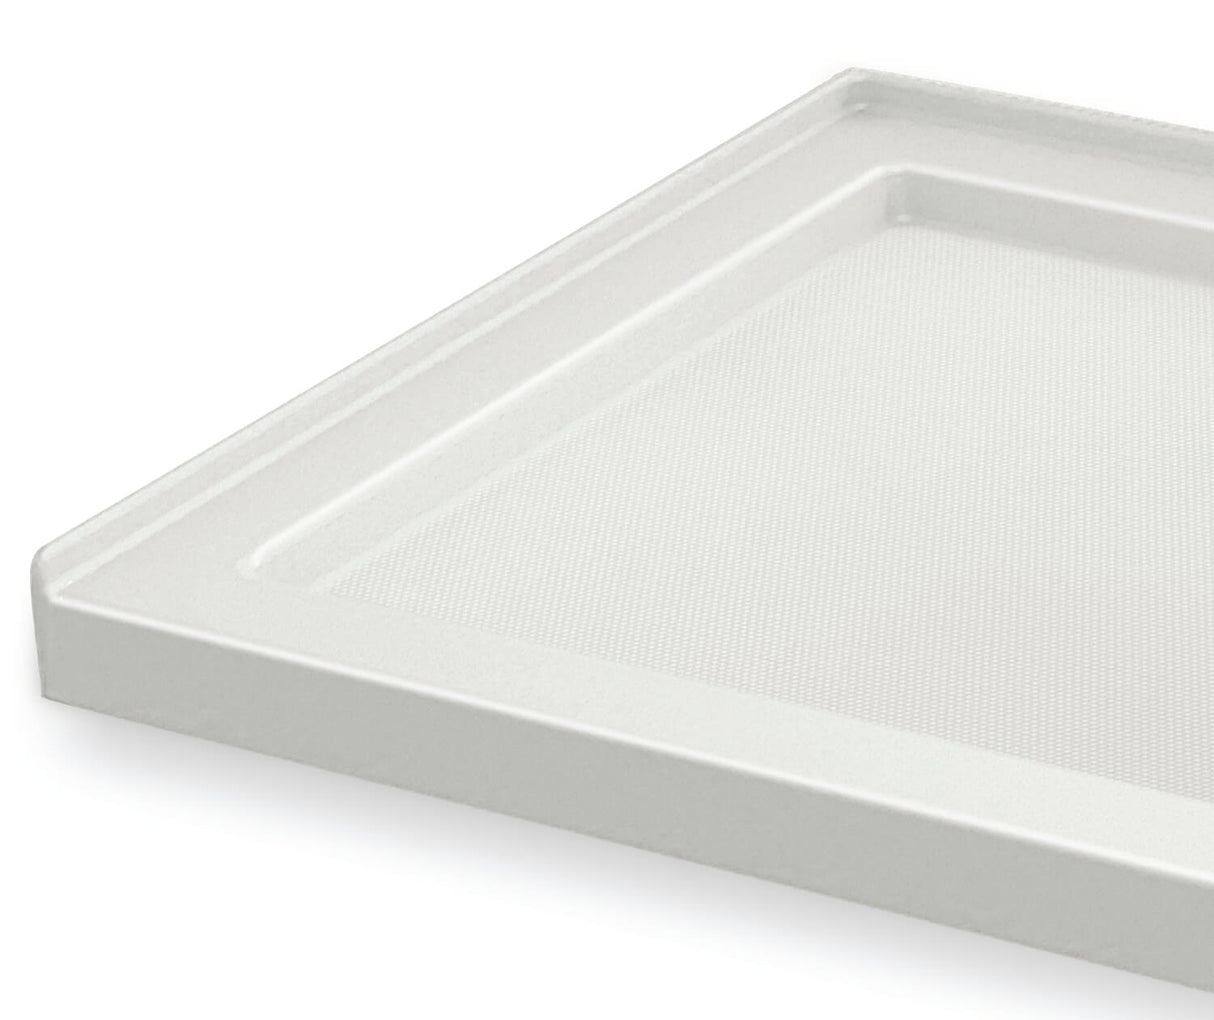 MAAX 420006-542-001-104 B3Square 6036 Acrylic Corner Left Shower Base in White with Anti-slip Bottom with Left-Hand Drain